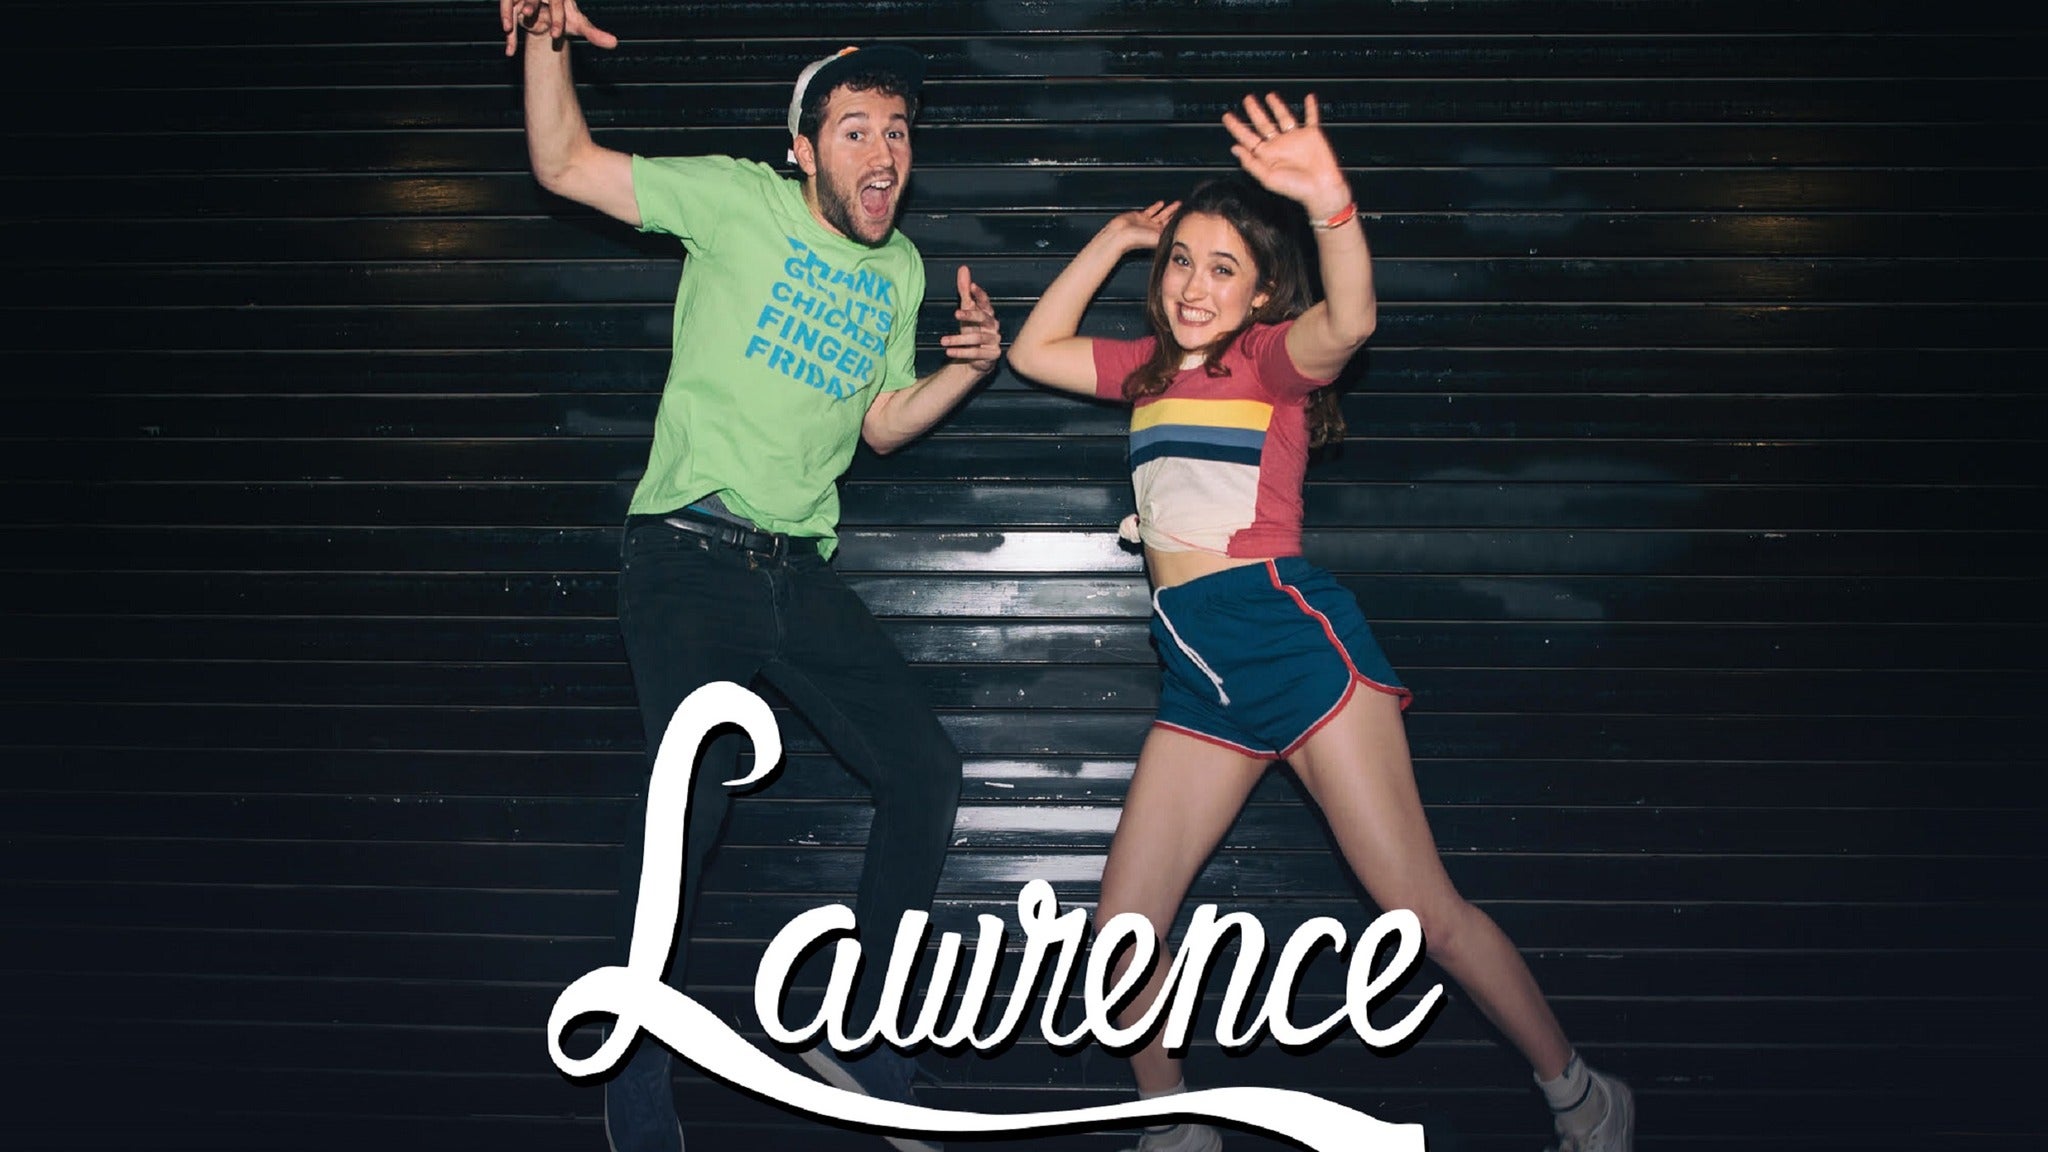 Lawrence in San Francisco promo photo for Exclusive presale offer code